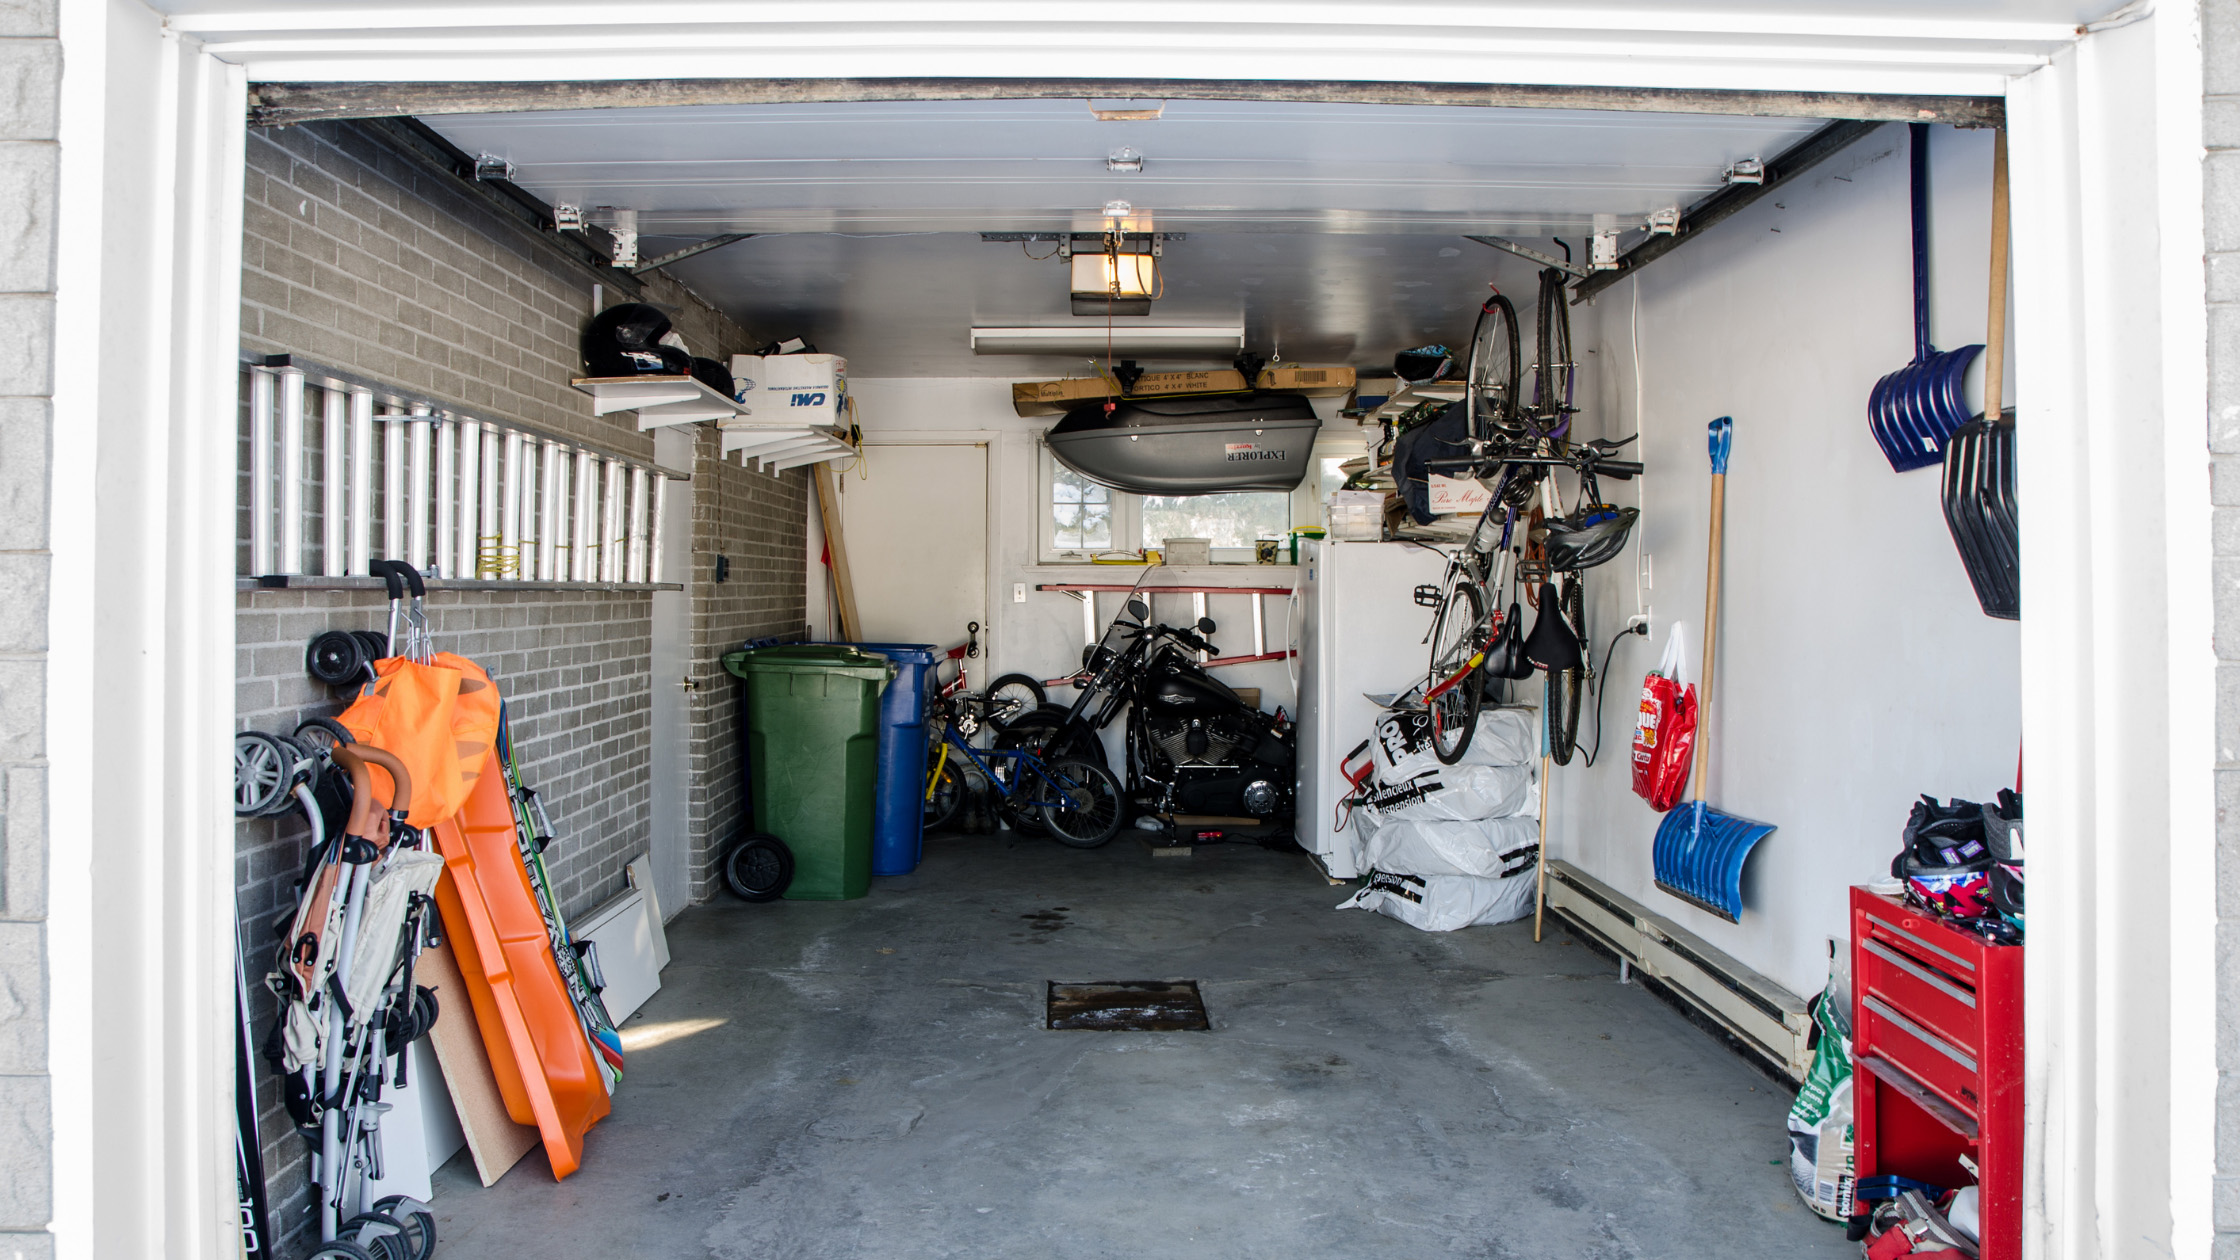 How To Add a Ductless Mini Split to Your Garage